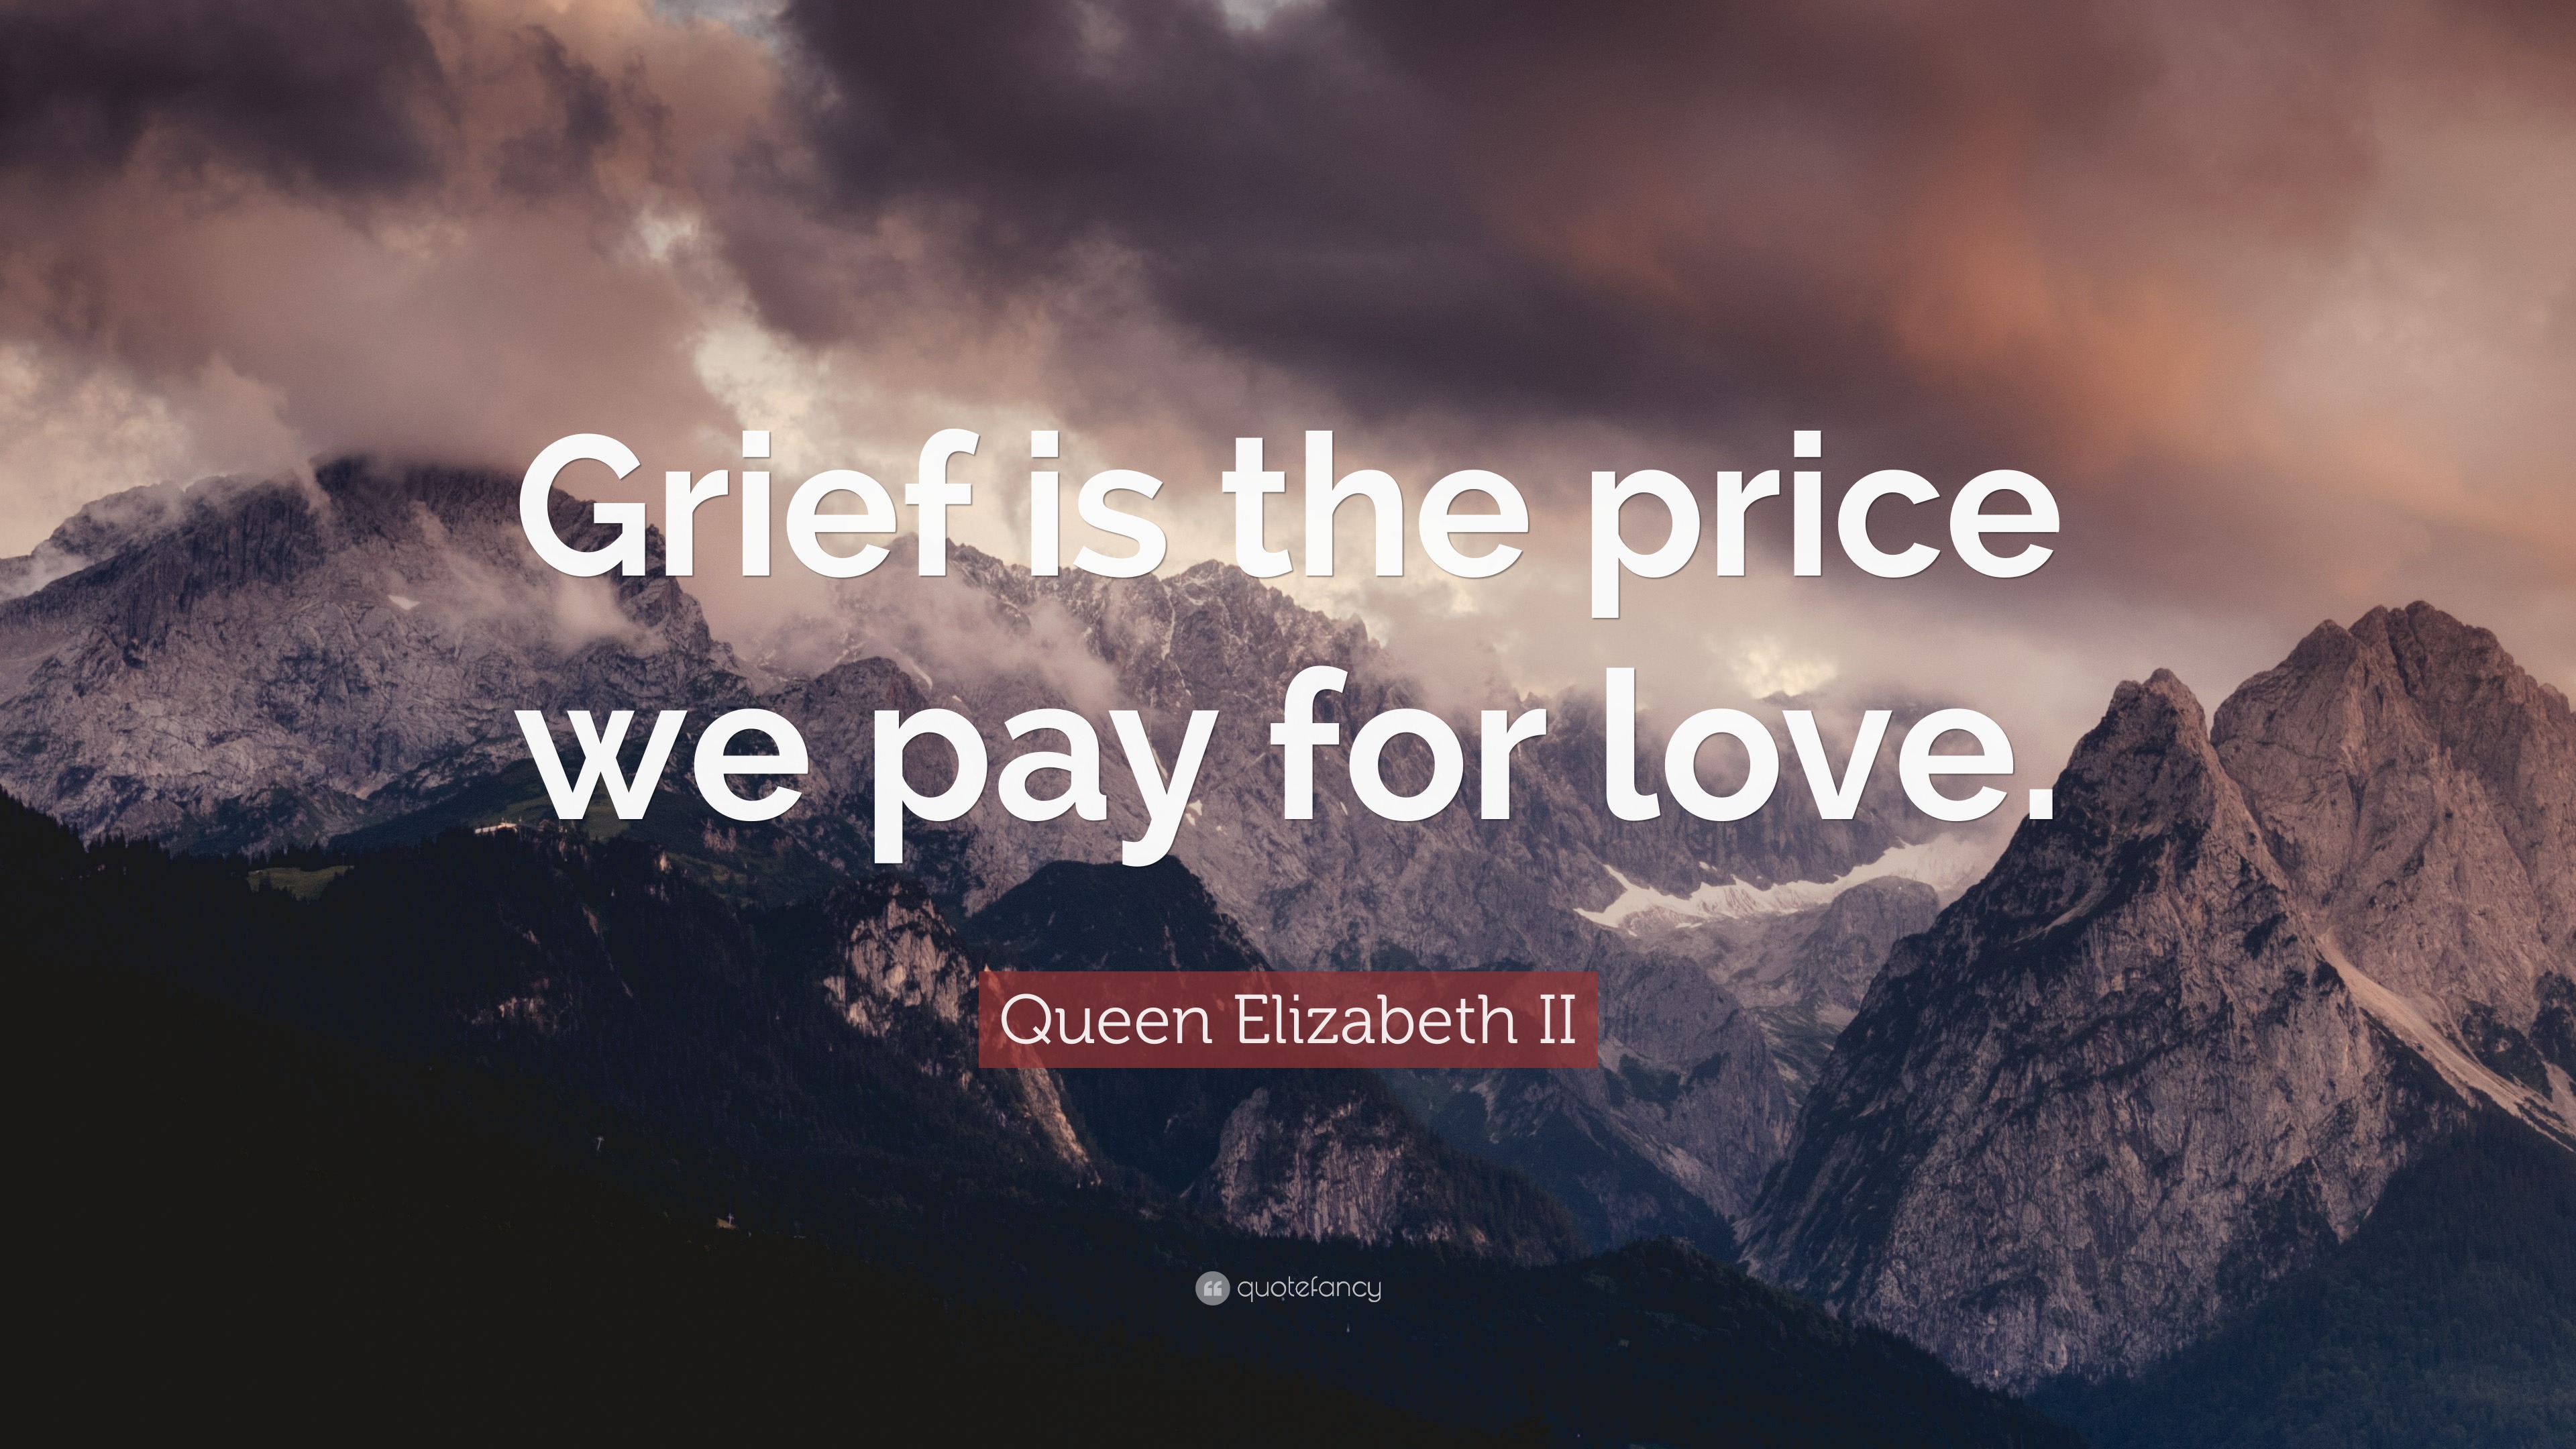 Queen Elizabeth II Quote “Grief is the price we pay for